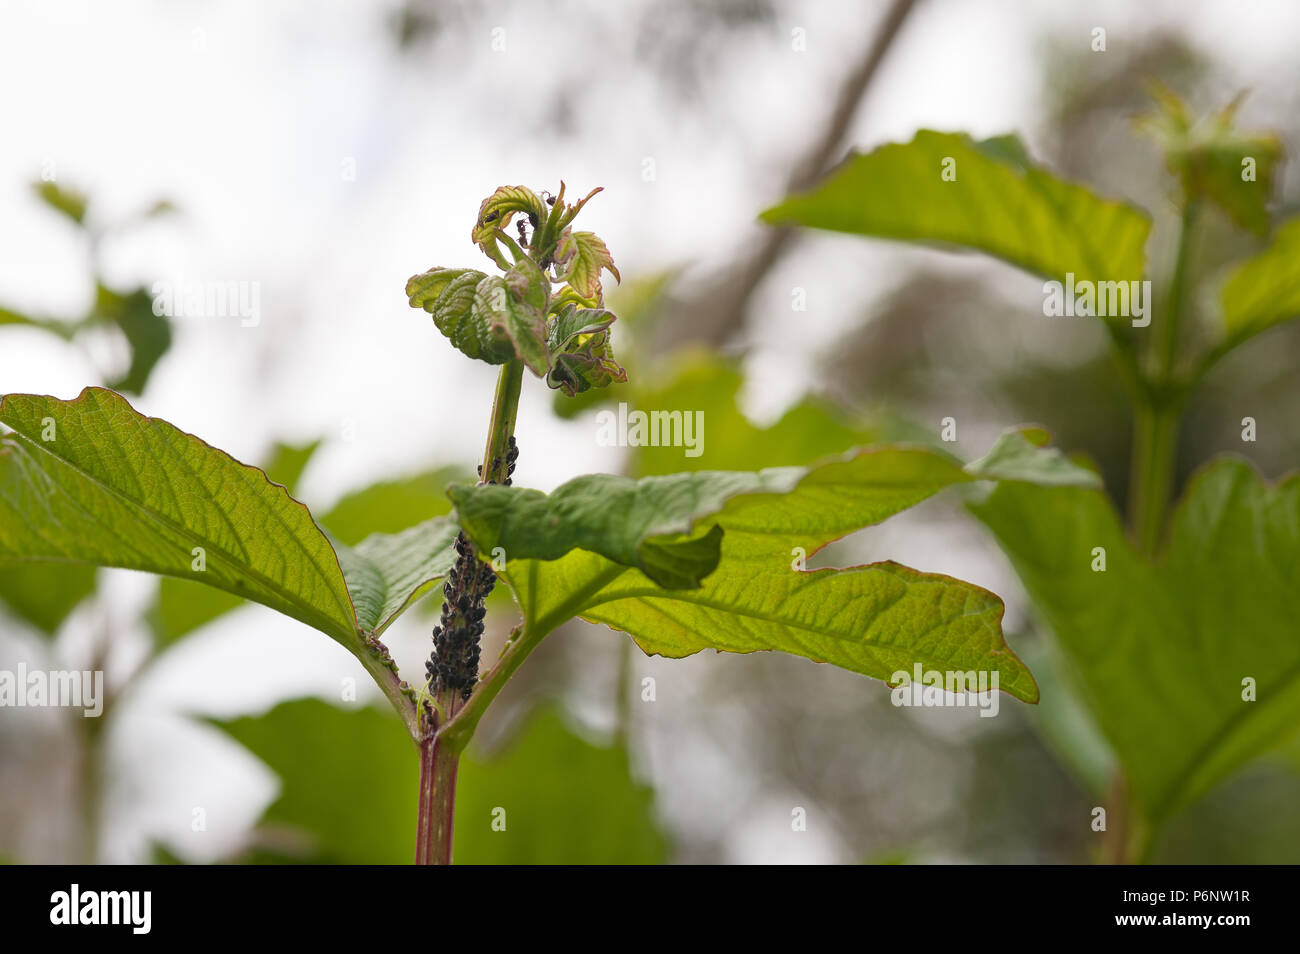 Farming of black apterous aphids by ants for their secretions of honey dew, being cultivated at the growing tips of Viburnum opulus, Guilder rose Stock Photo